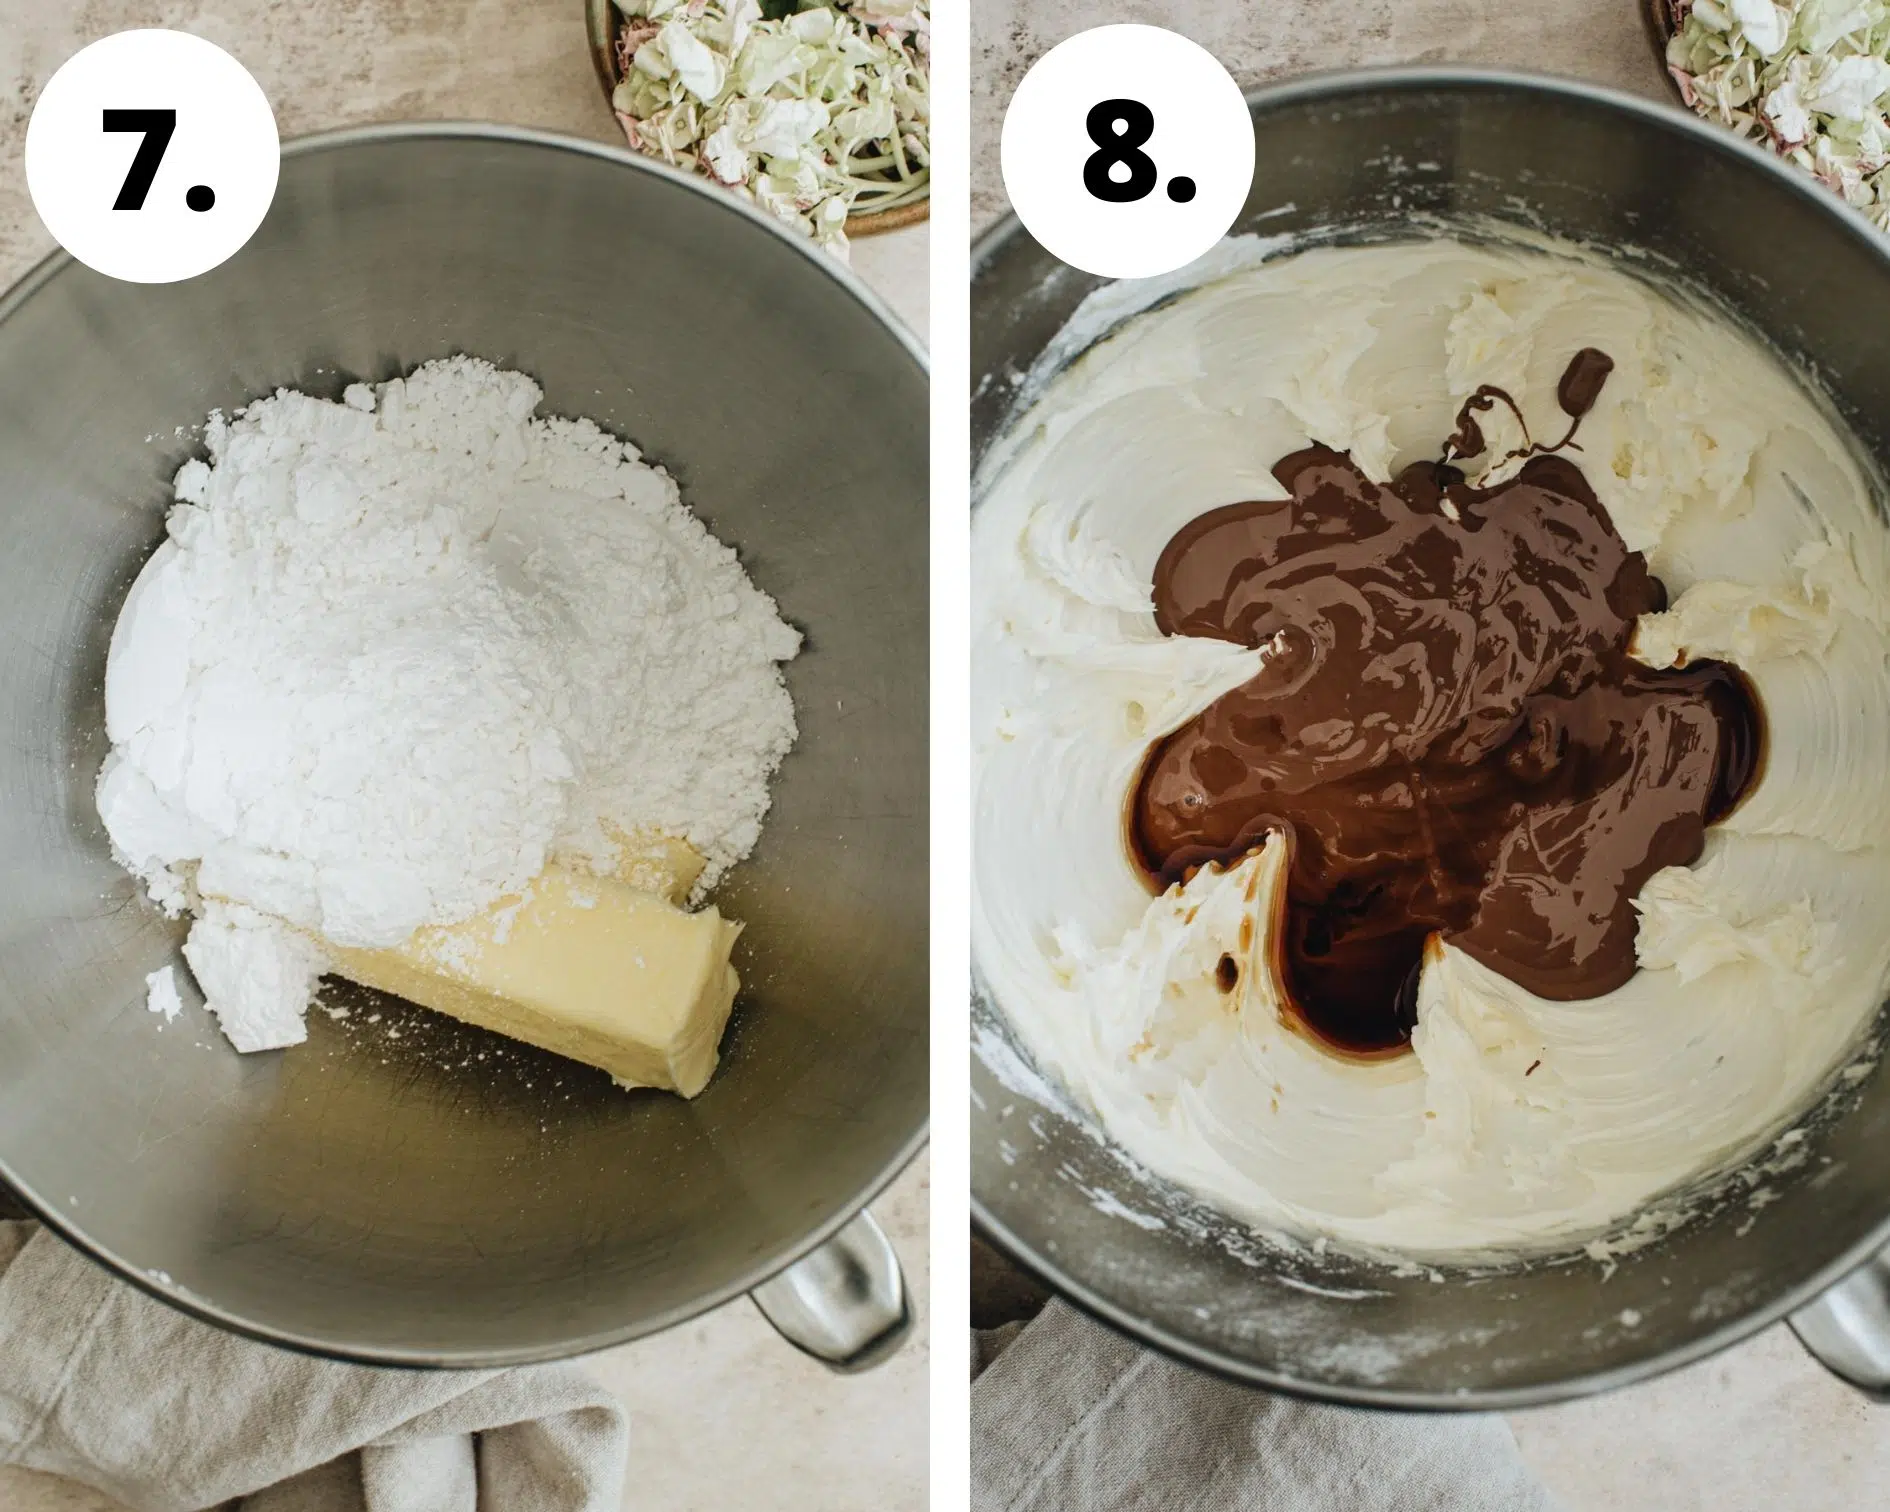 Brownie cake process steps 7 and 8.